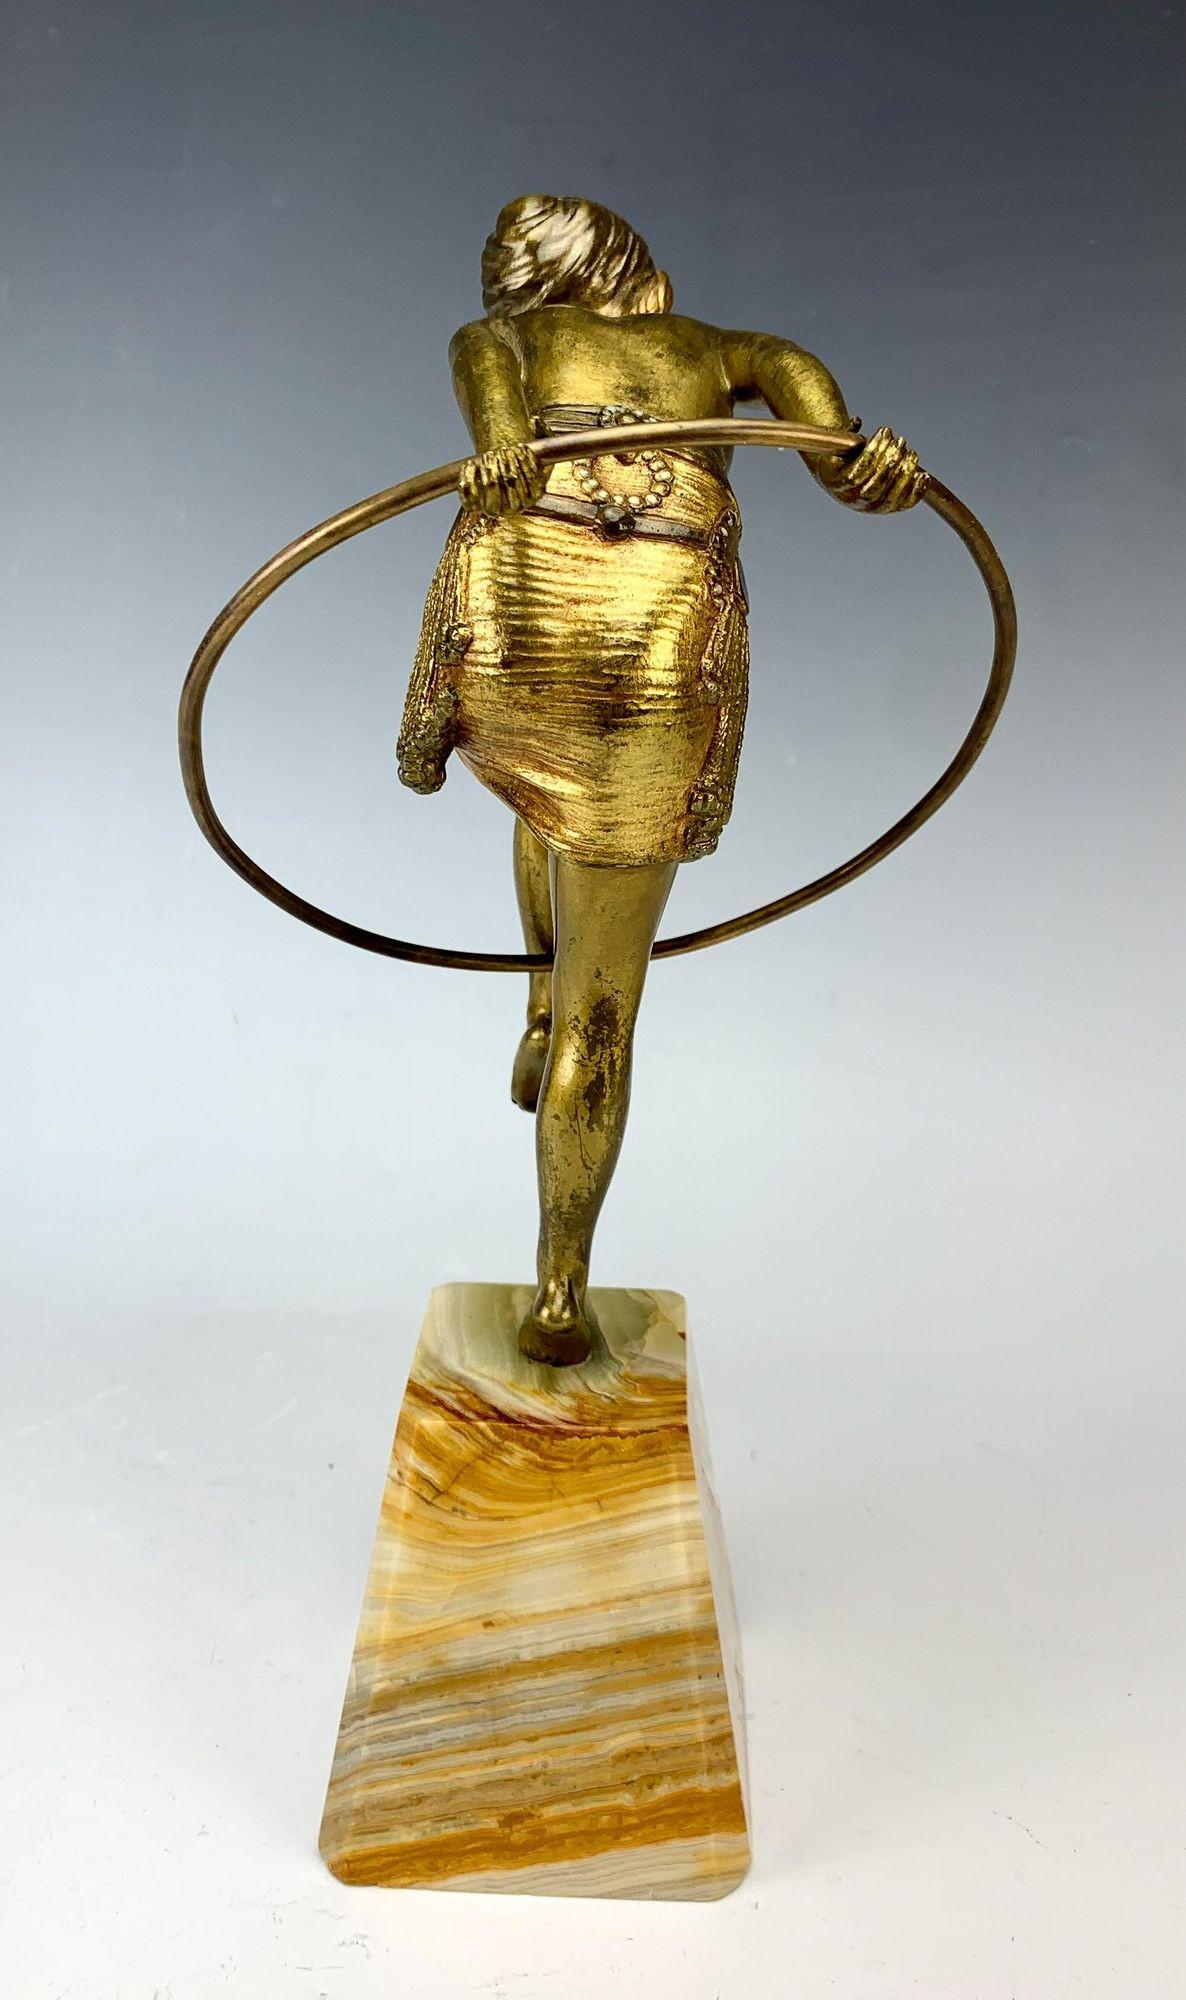 Early 20th Century Hoop Dancer Gilt Bronze Sculpture on Onyx Base by D.H. Chiparus, c. 1920 For Sale